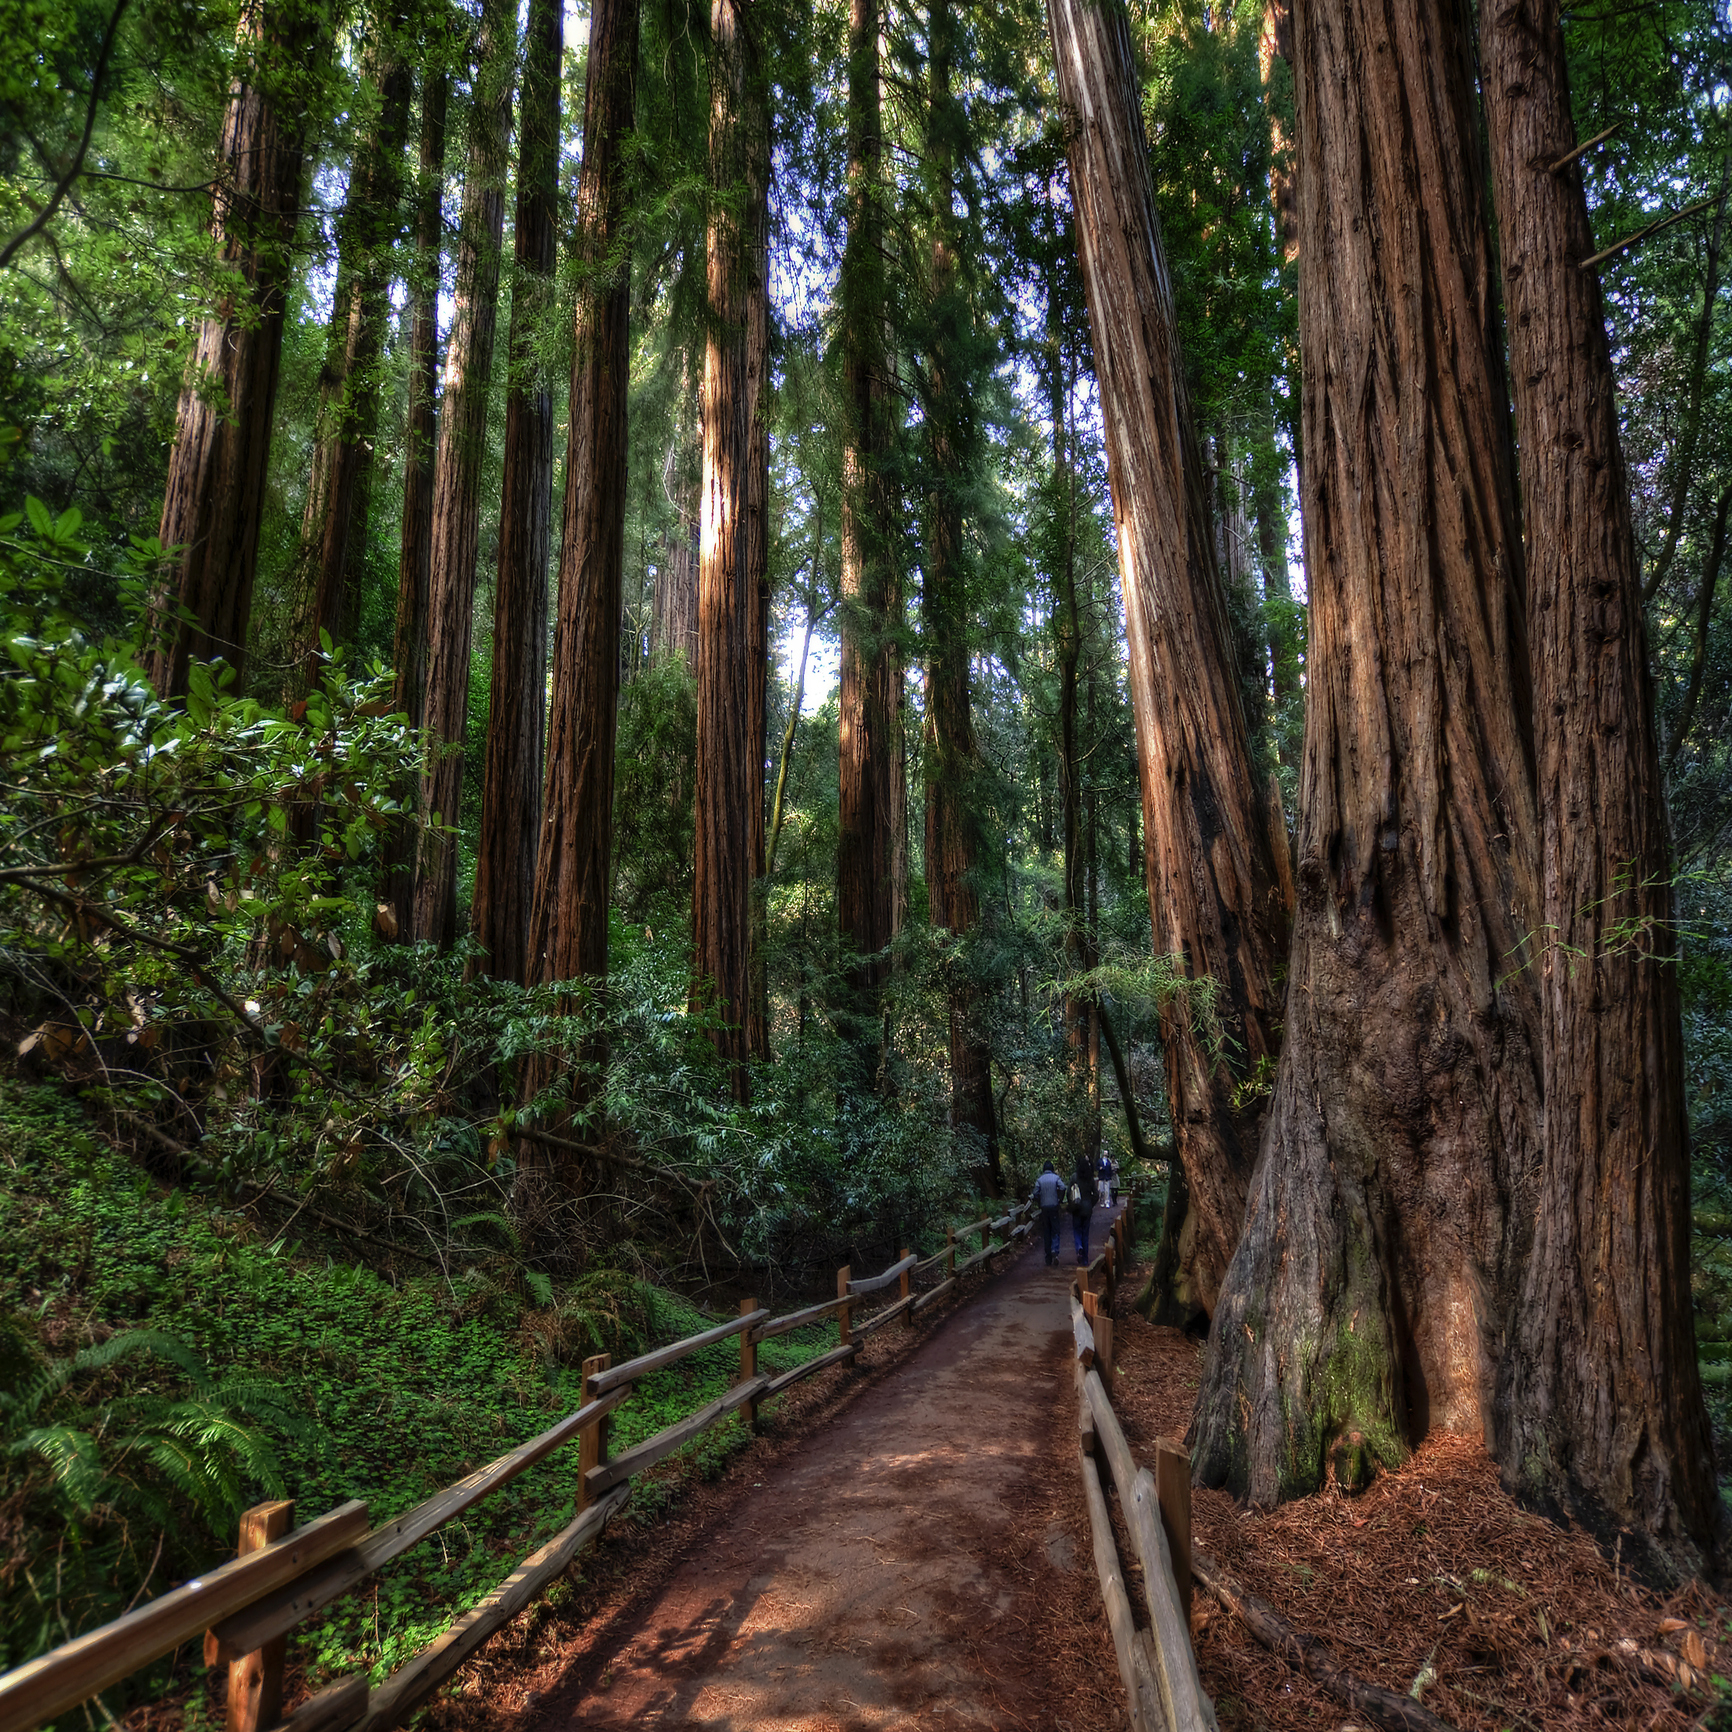 Pathway through towering redwood forest with fence and person walking